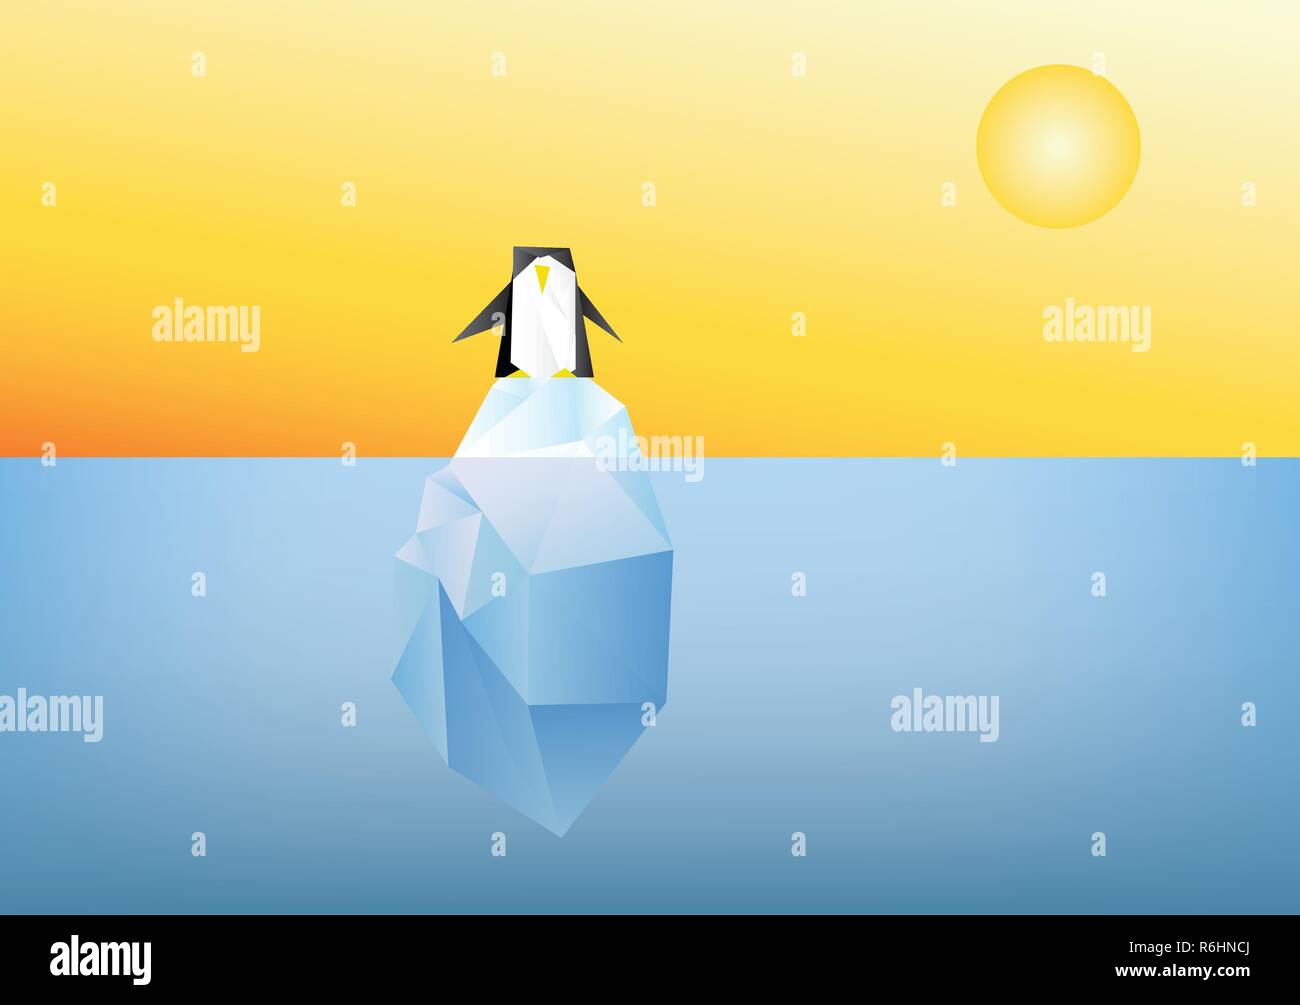 penguin on ice floe island illustration - global warming concept vector graphic Stock Photo